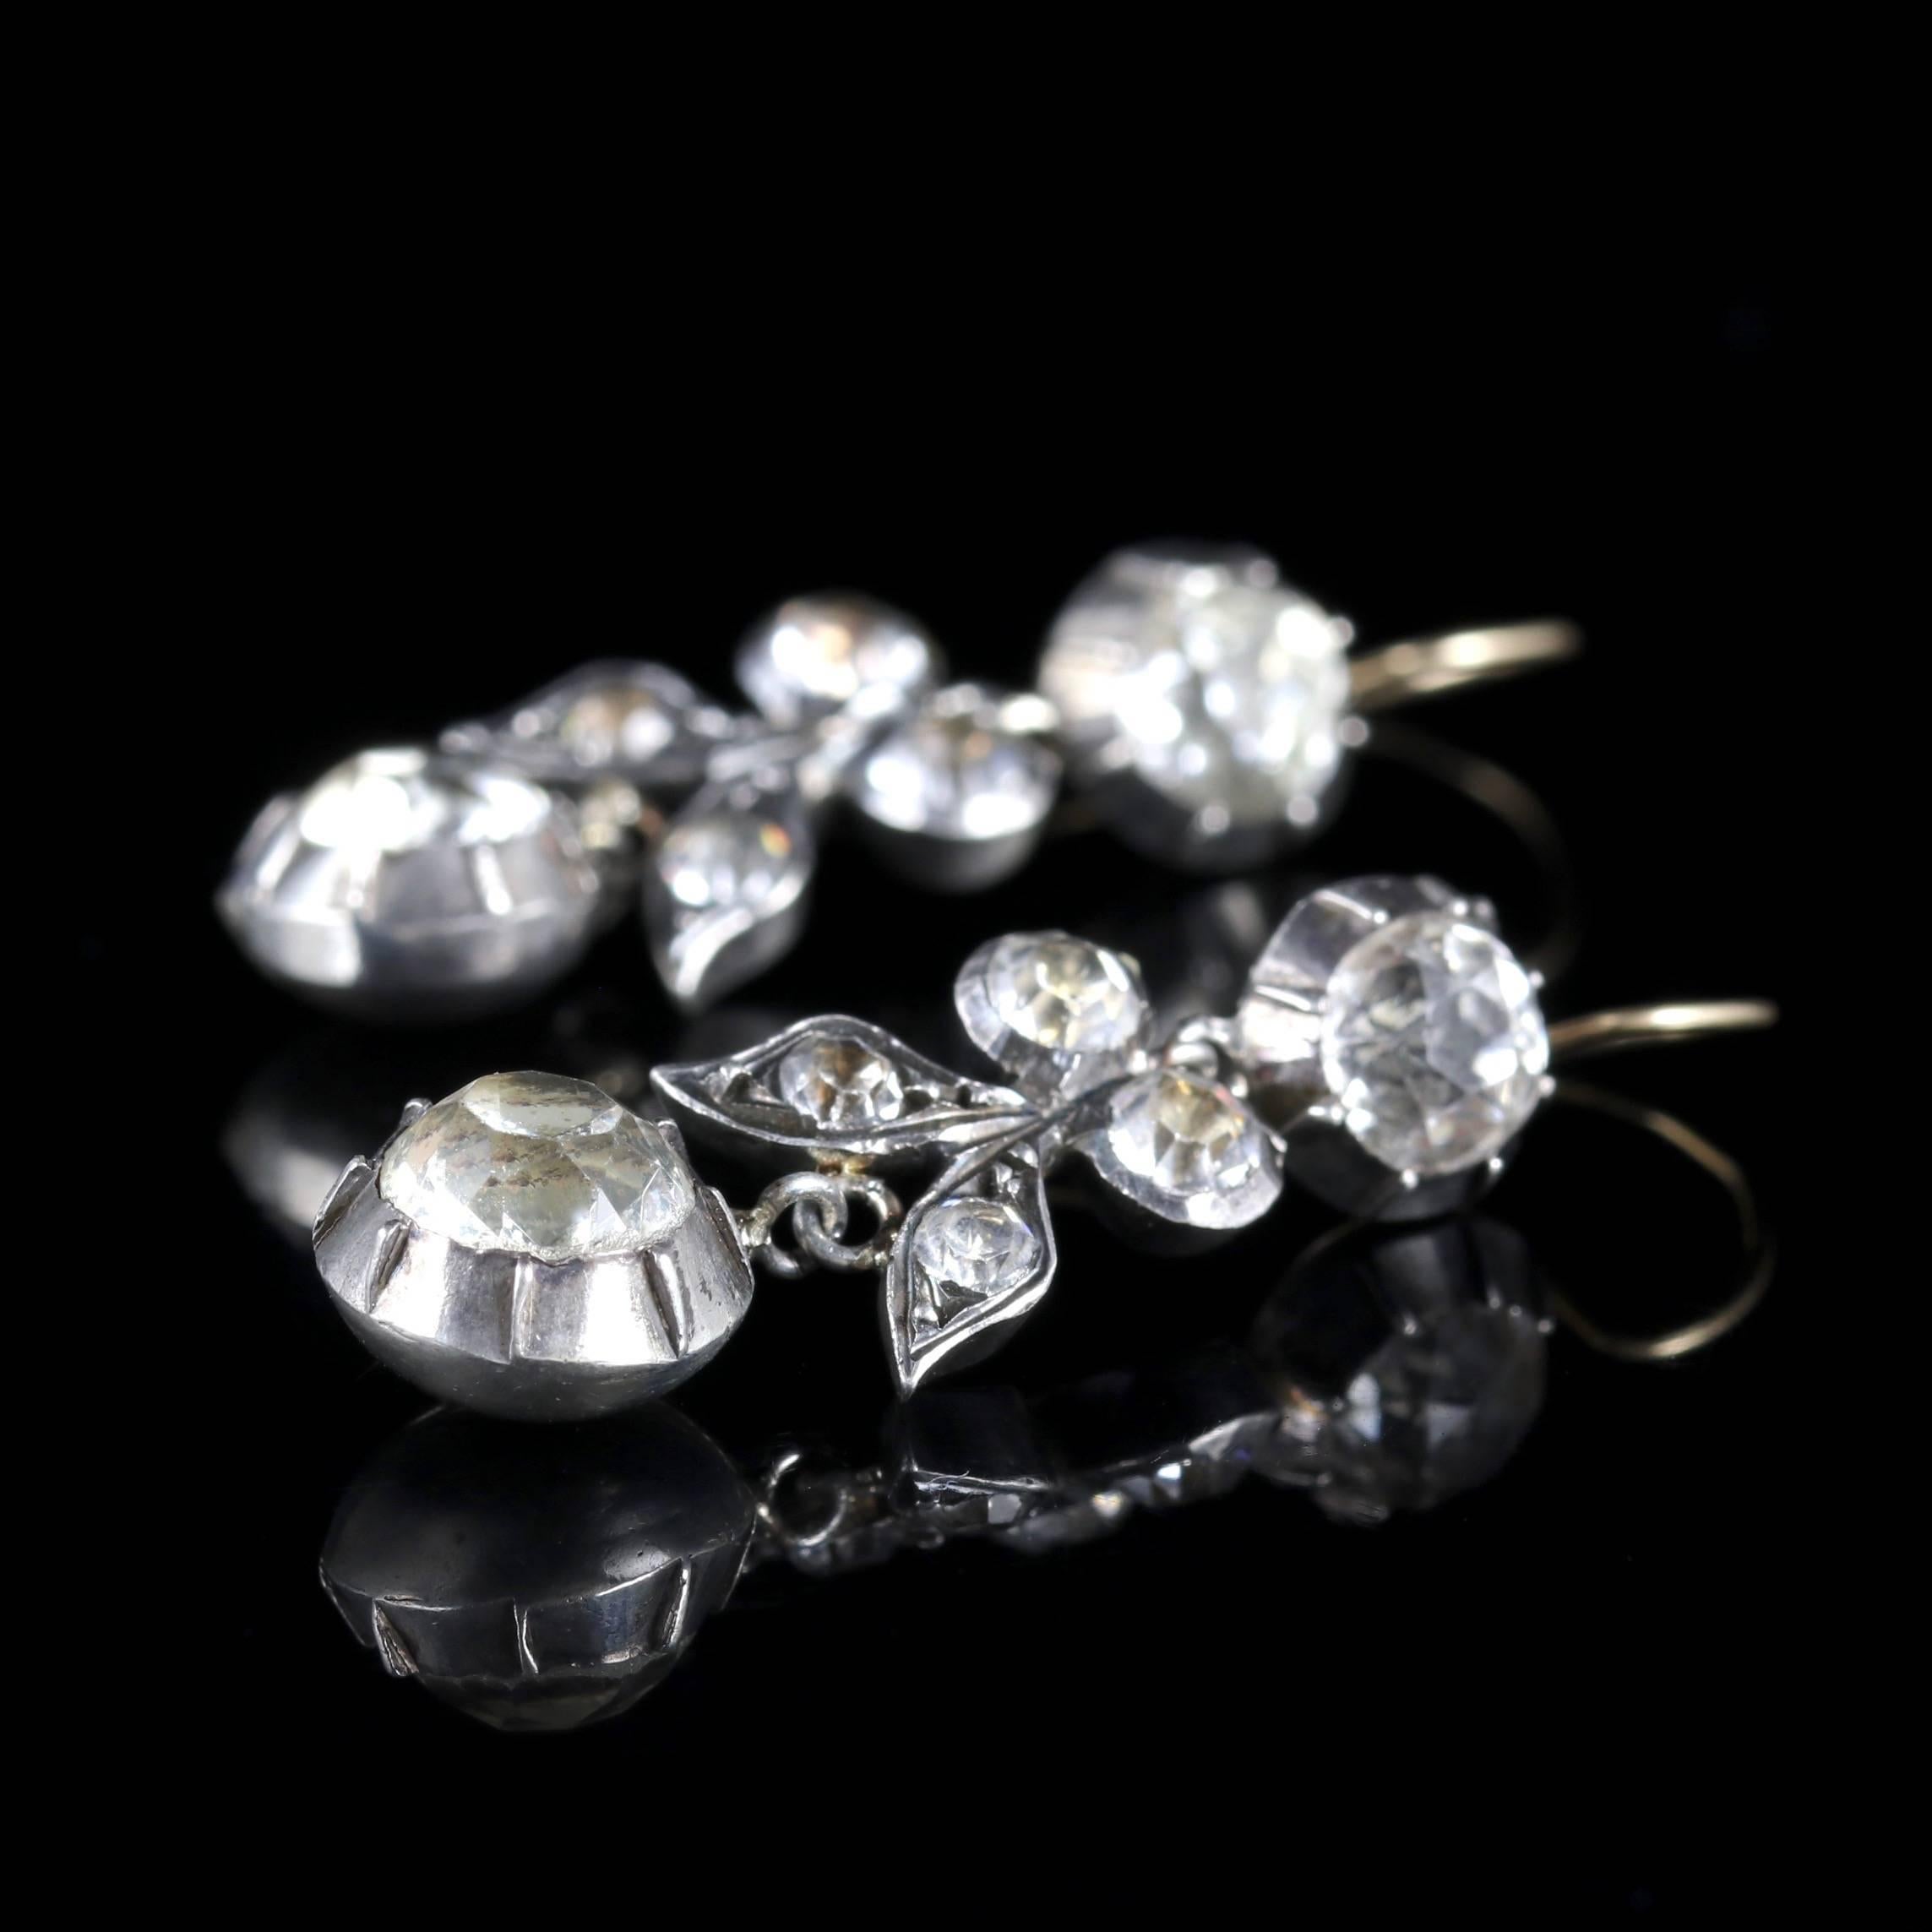 These delightful Georgian Paste drop earrings are Circa 1800.

Each Paste stone is cushion cut, sparkling just like Diamonds.

Due to its age, Georgian jewellery is quite rare, with some pieces almost three hundred years old. From 1714 until 1837